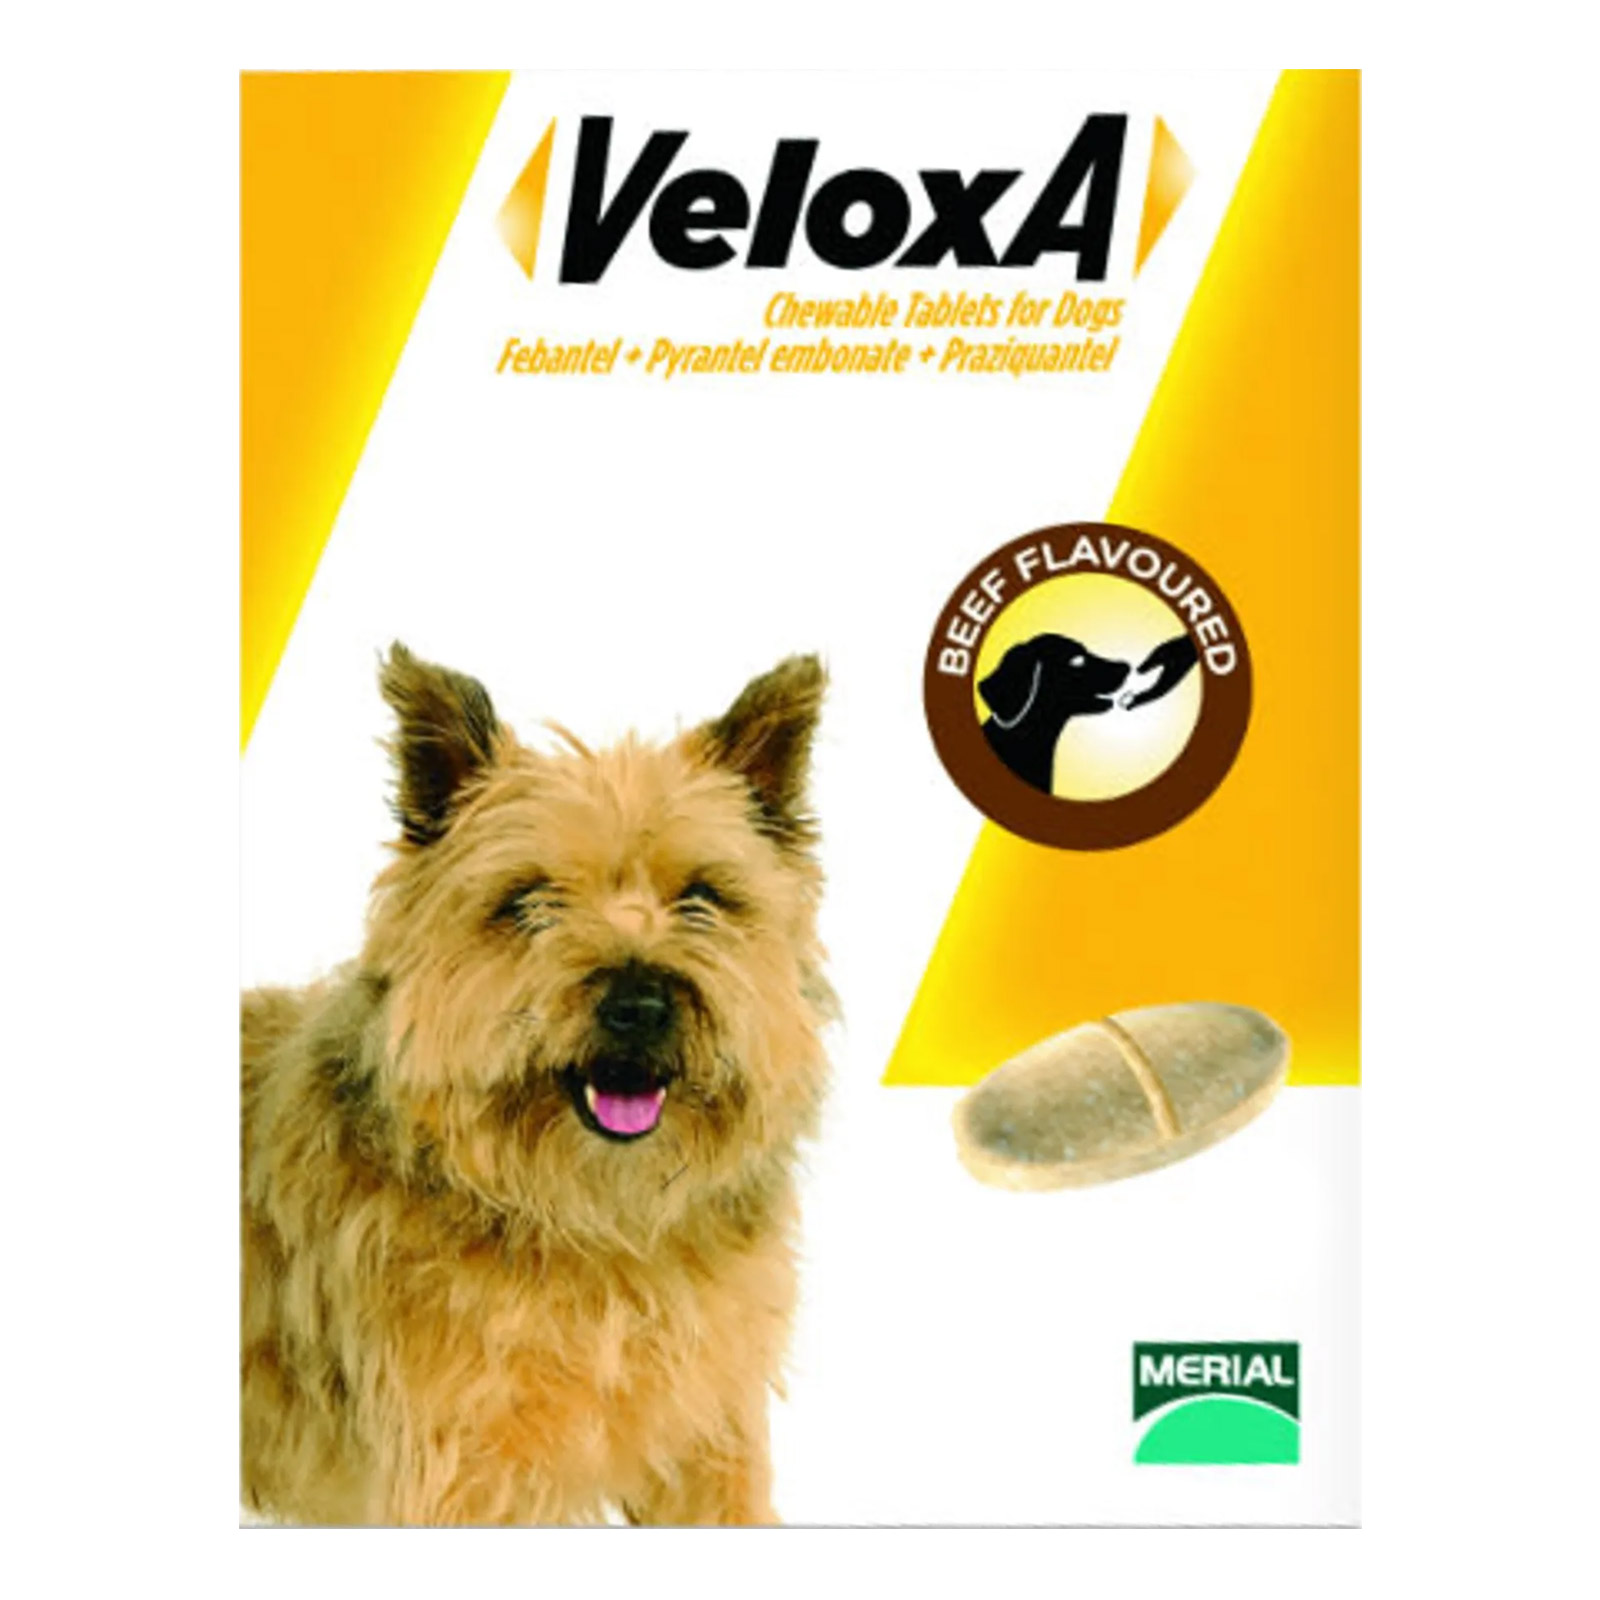 Veloxa Chewable Tablets For Dogs 2 Pack